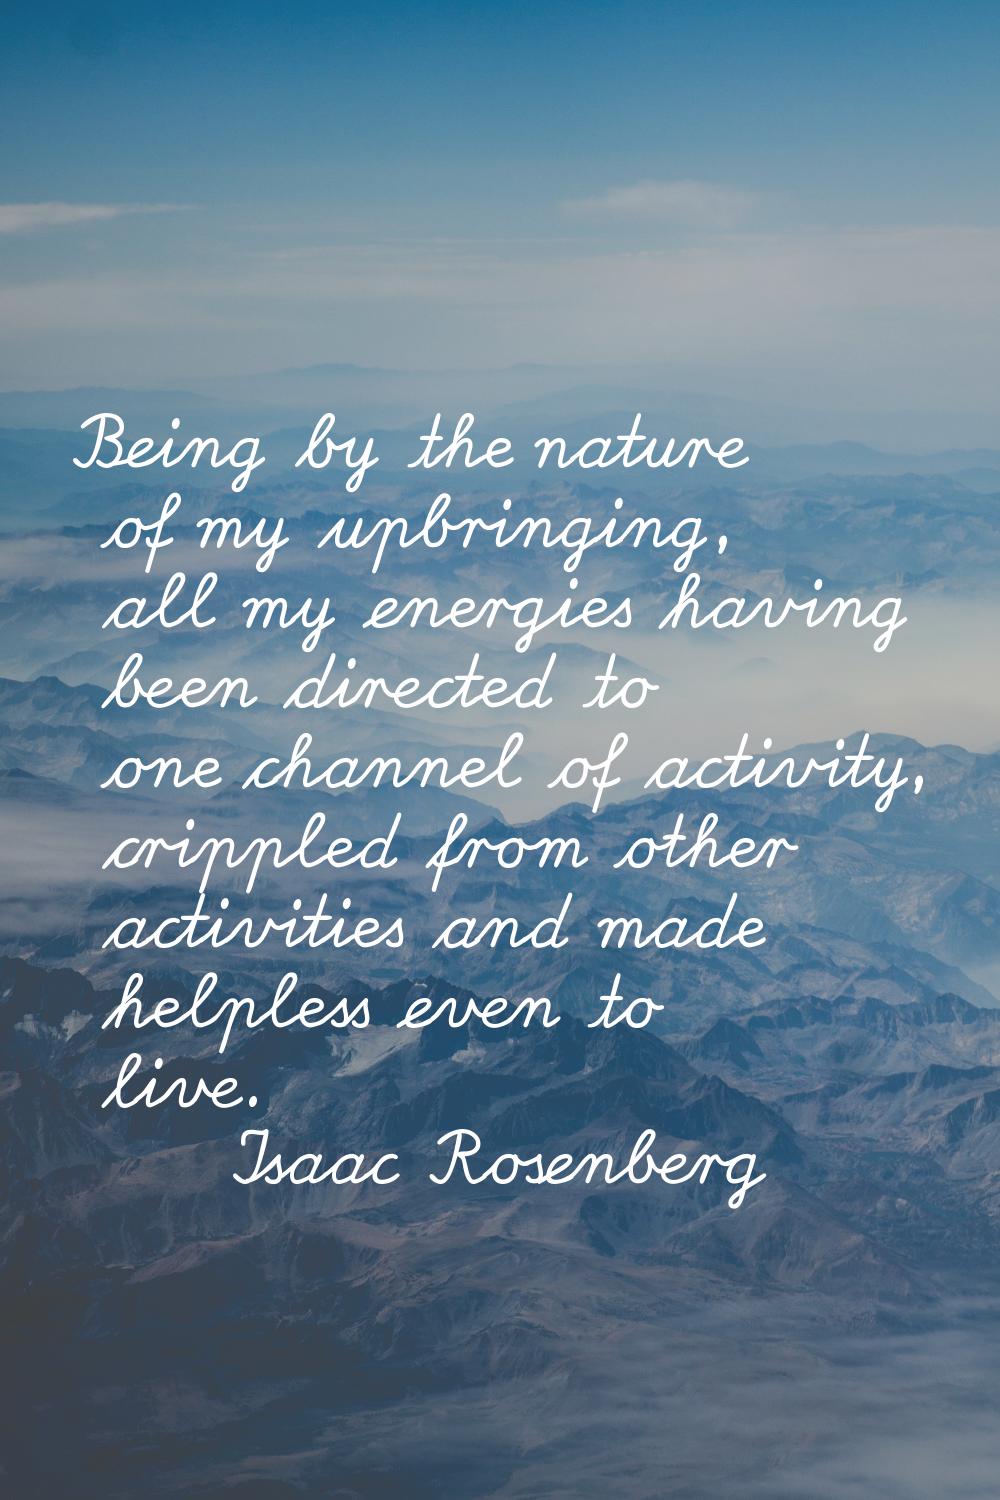 Being by the nature of my upbringing, all my energies having been directed to one channel of activi